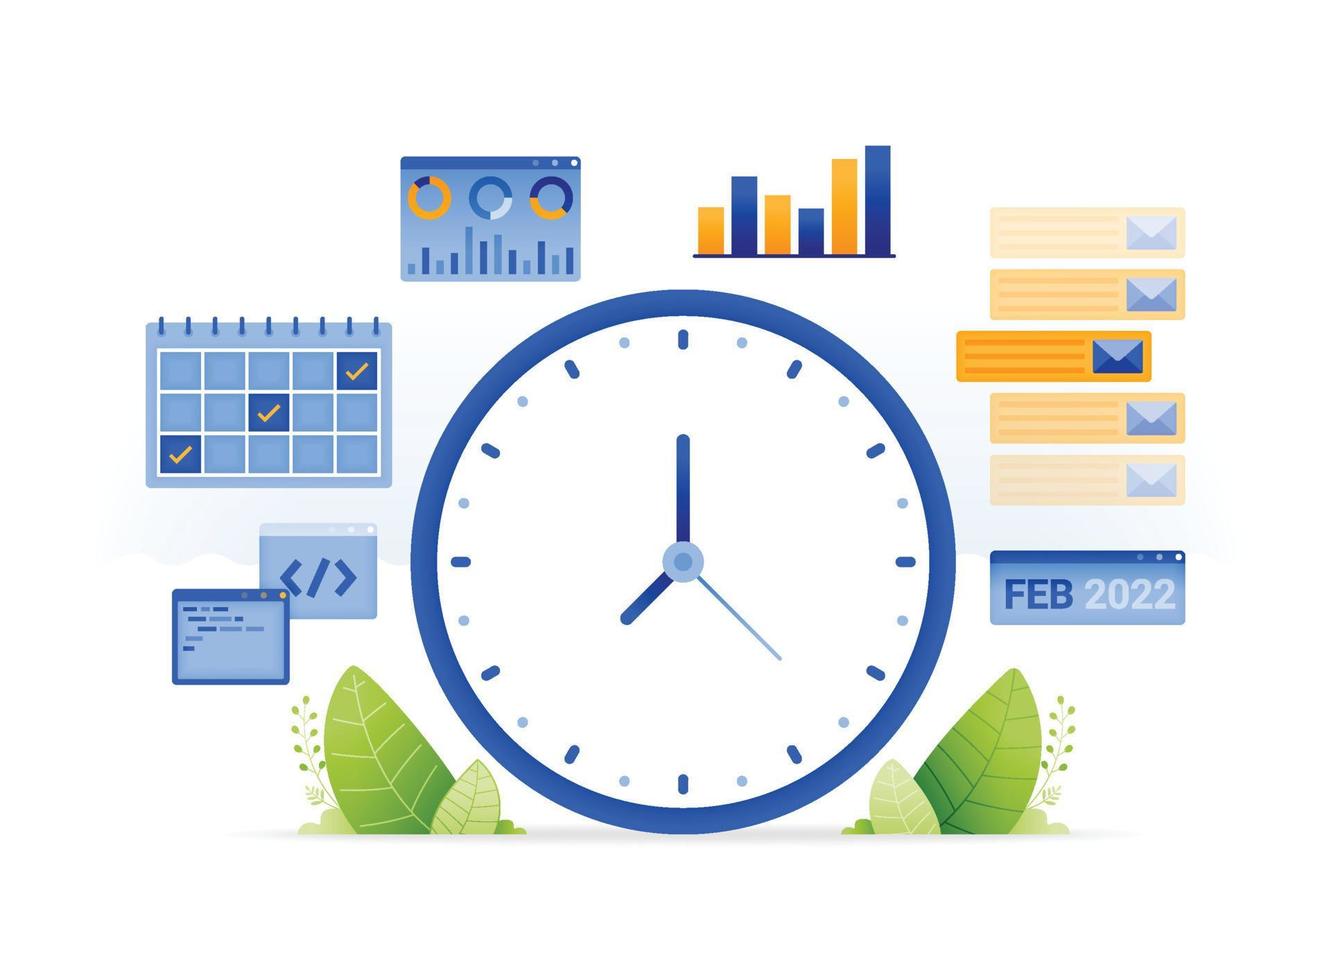 design illustration for time management in managing projects and multi tasking jobs. secluded agenda. organized work. job report statistics. can be used for web, website, posters, apps, brochures vector